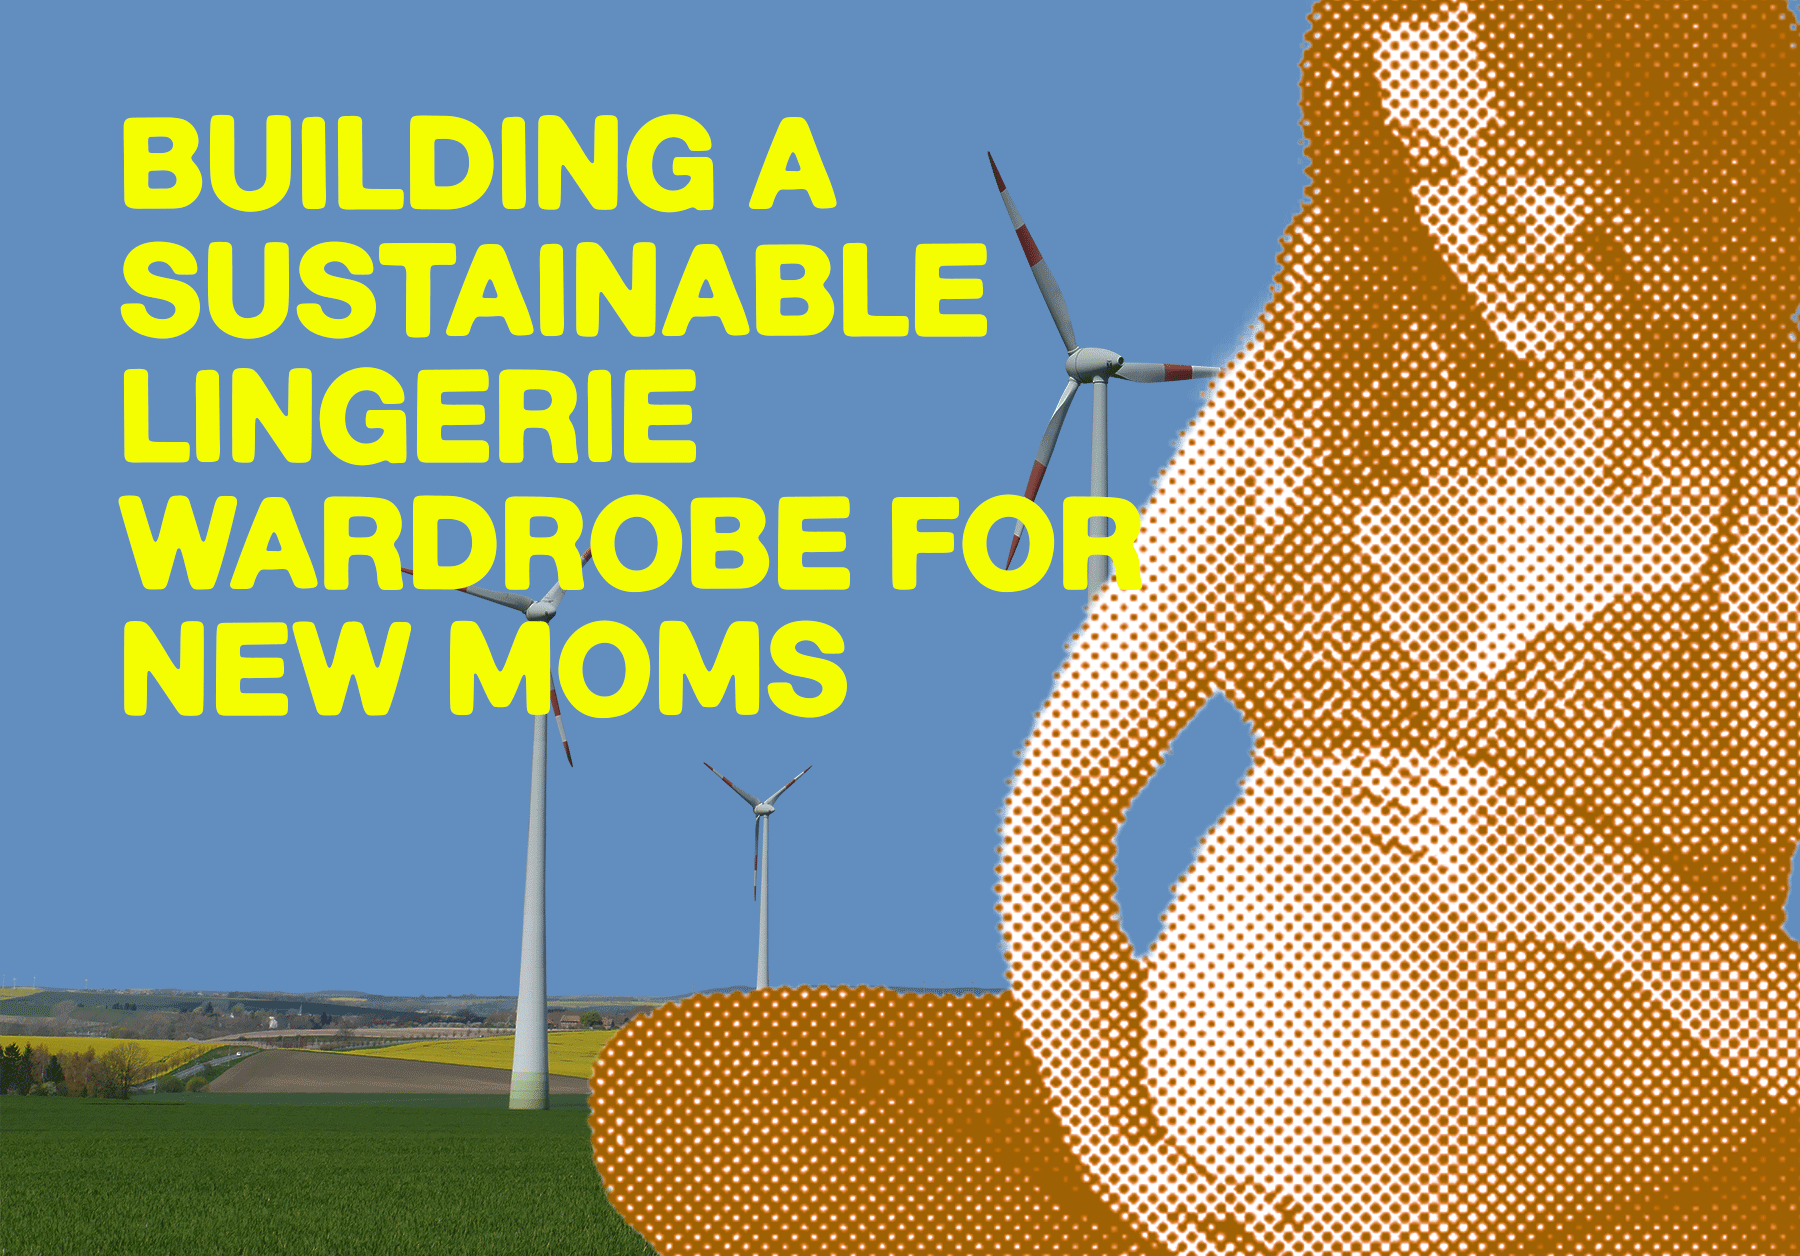 Building a Sustainable Lingerie Wardrobe for New Moms